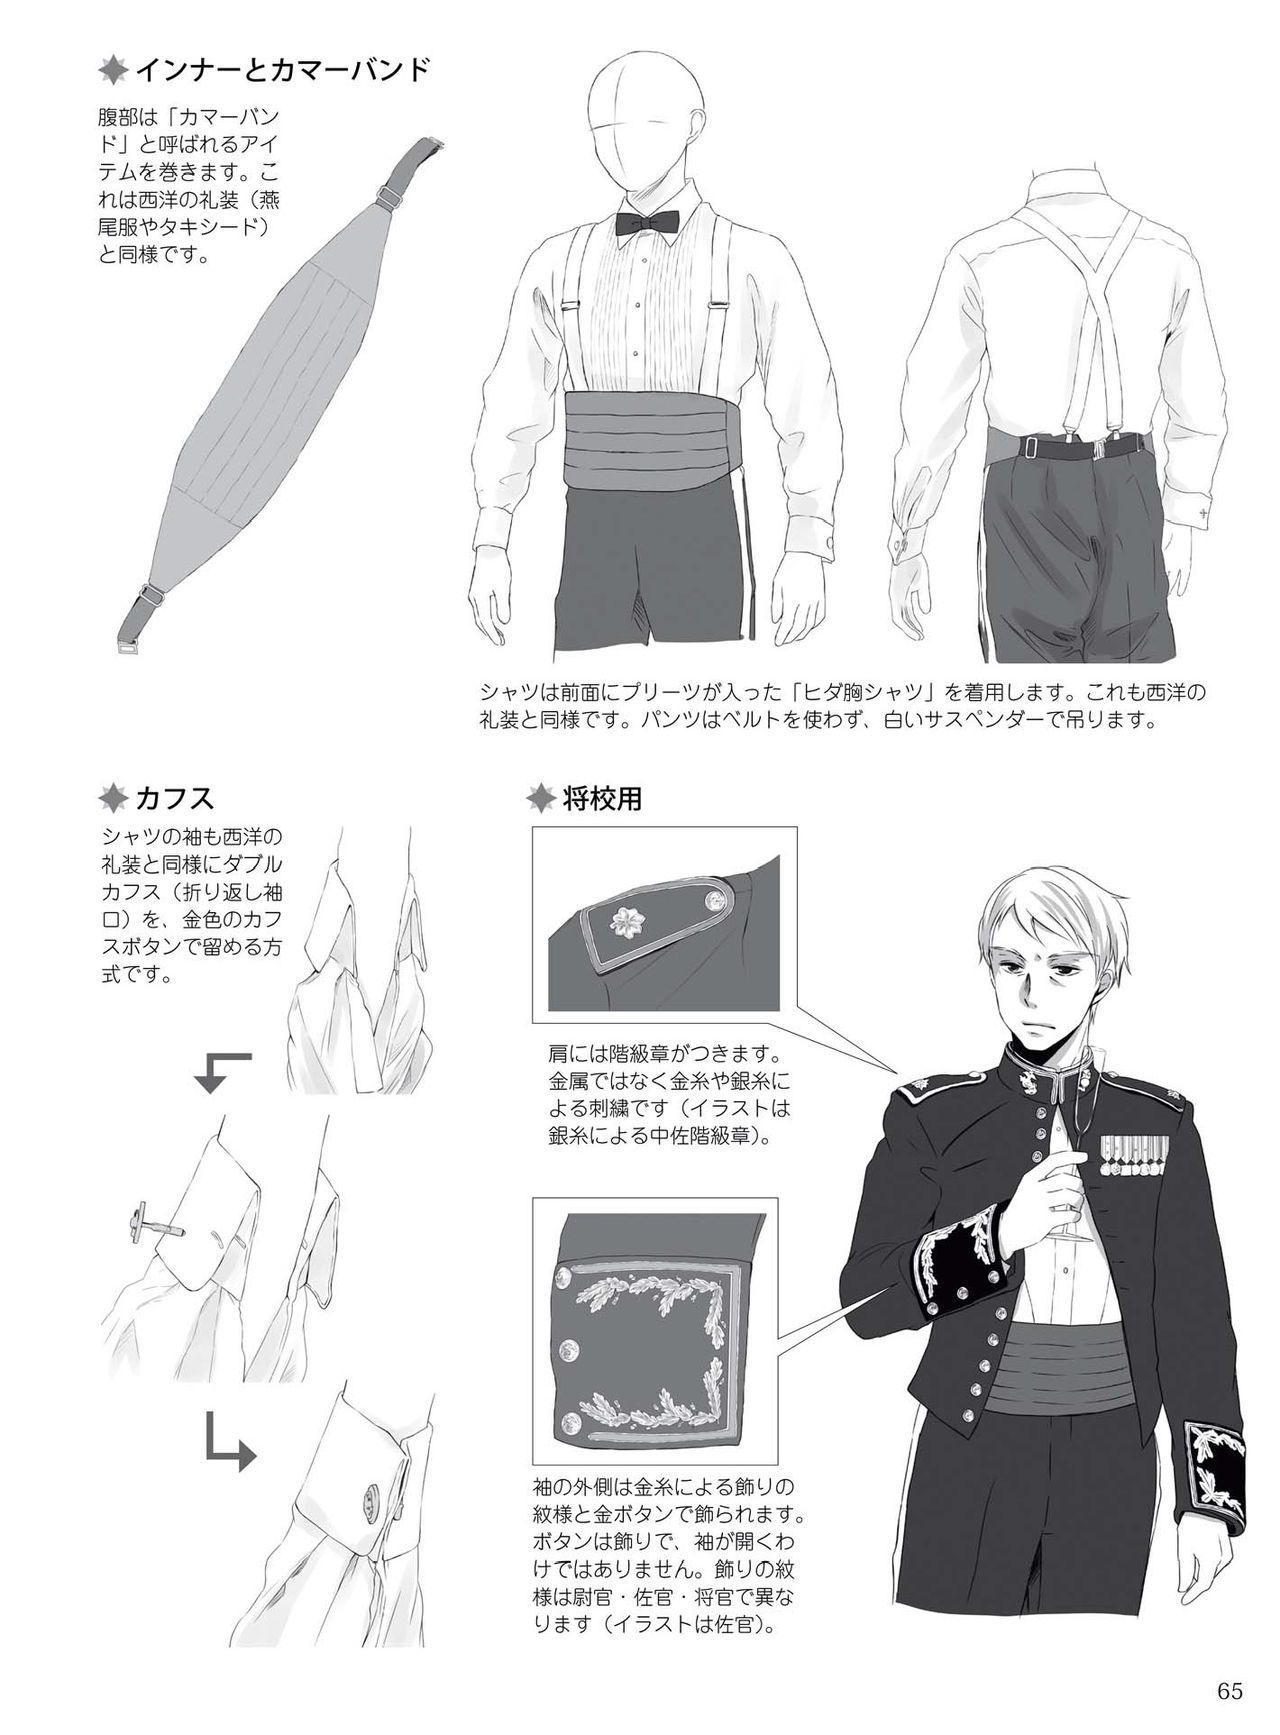 How to draw military uniforms and uniforms From Self-Defense Forces 軍服・制服の描き方 アメリカ軍・自衛隊の制服から戦闘服まで 68